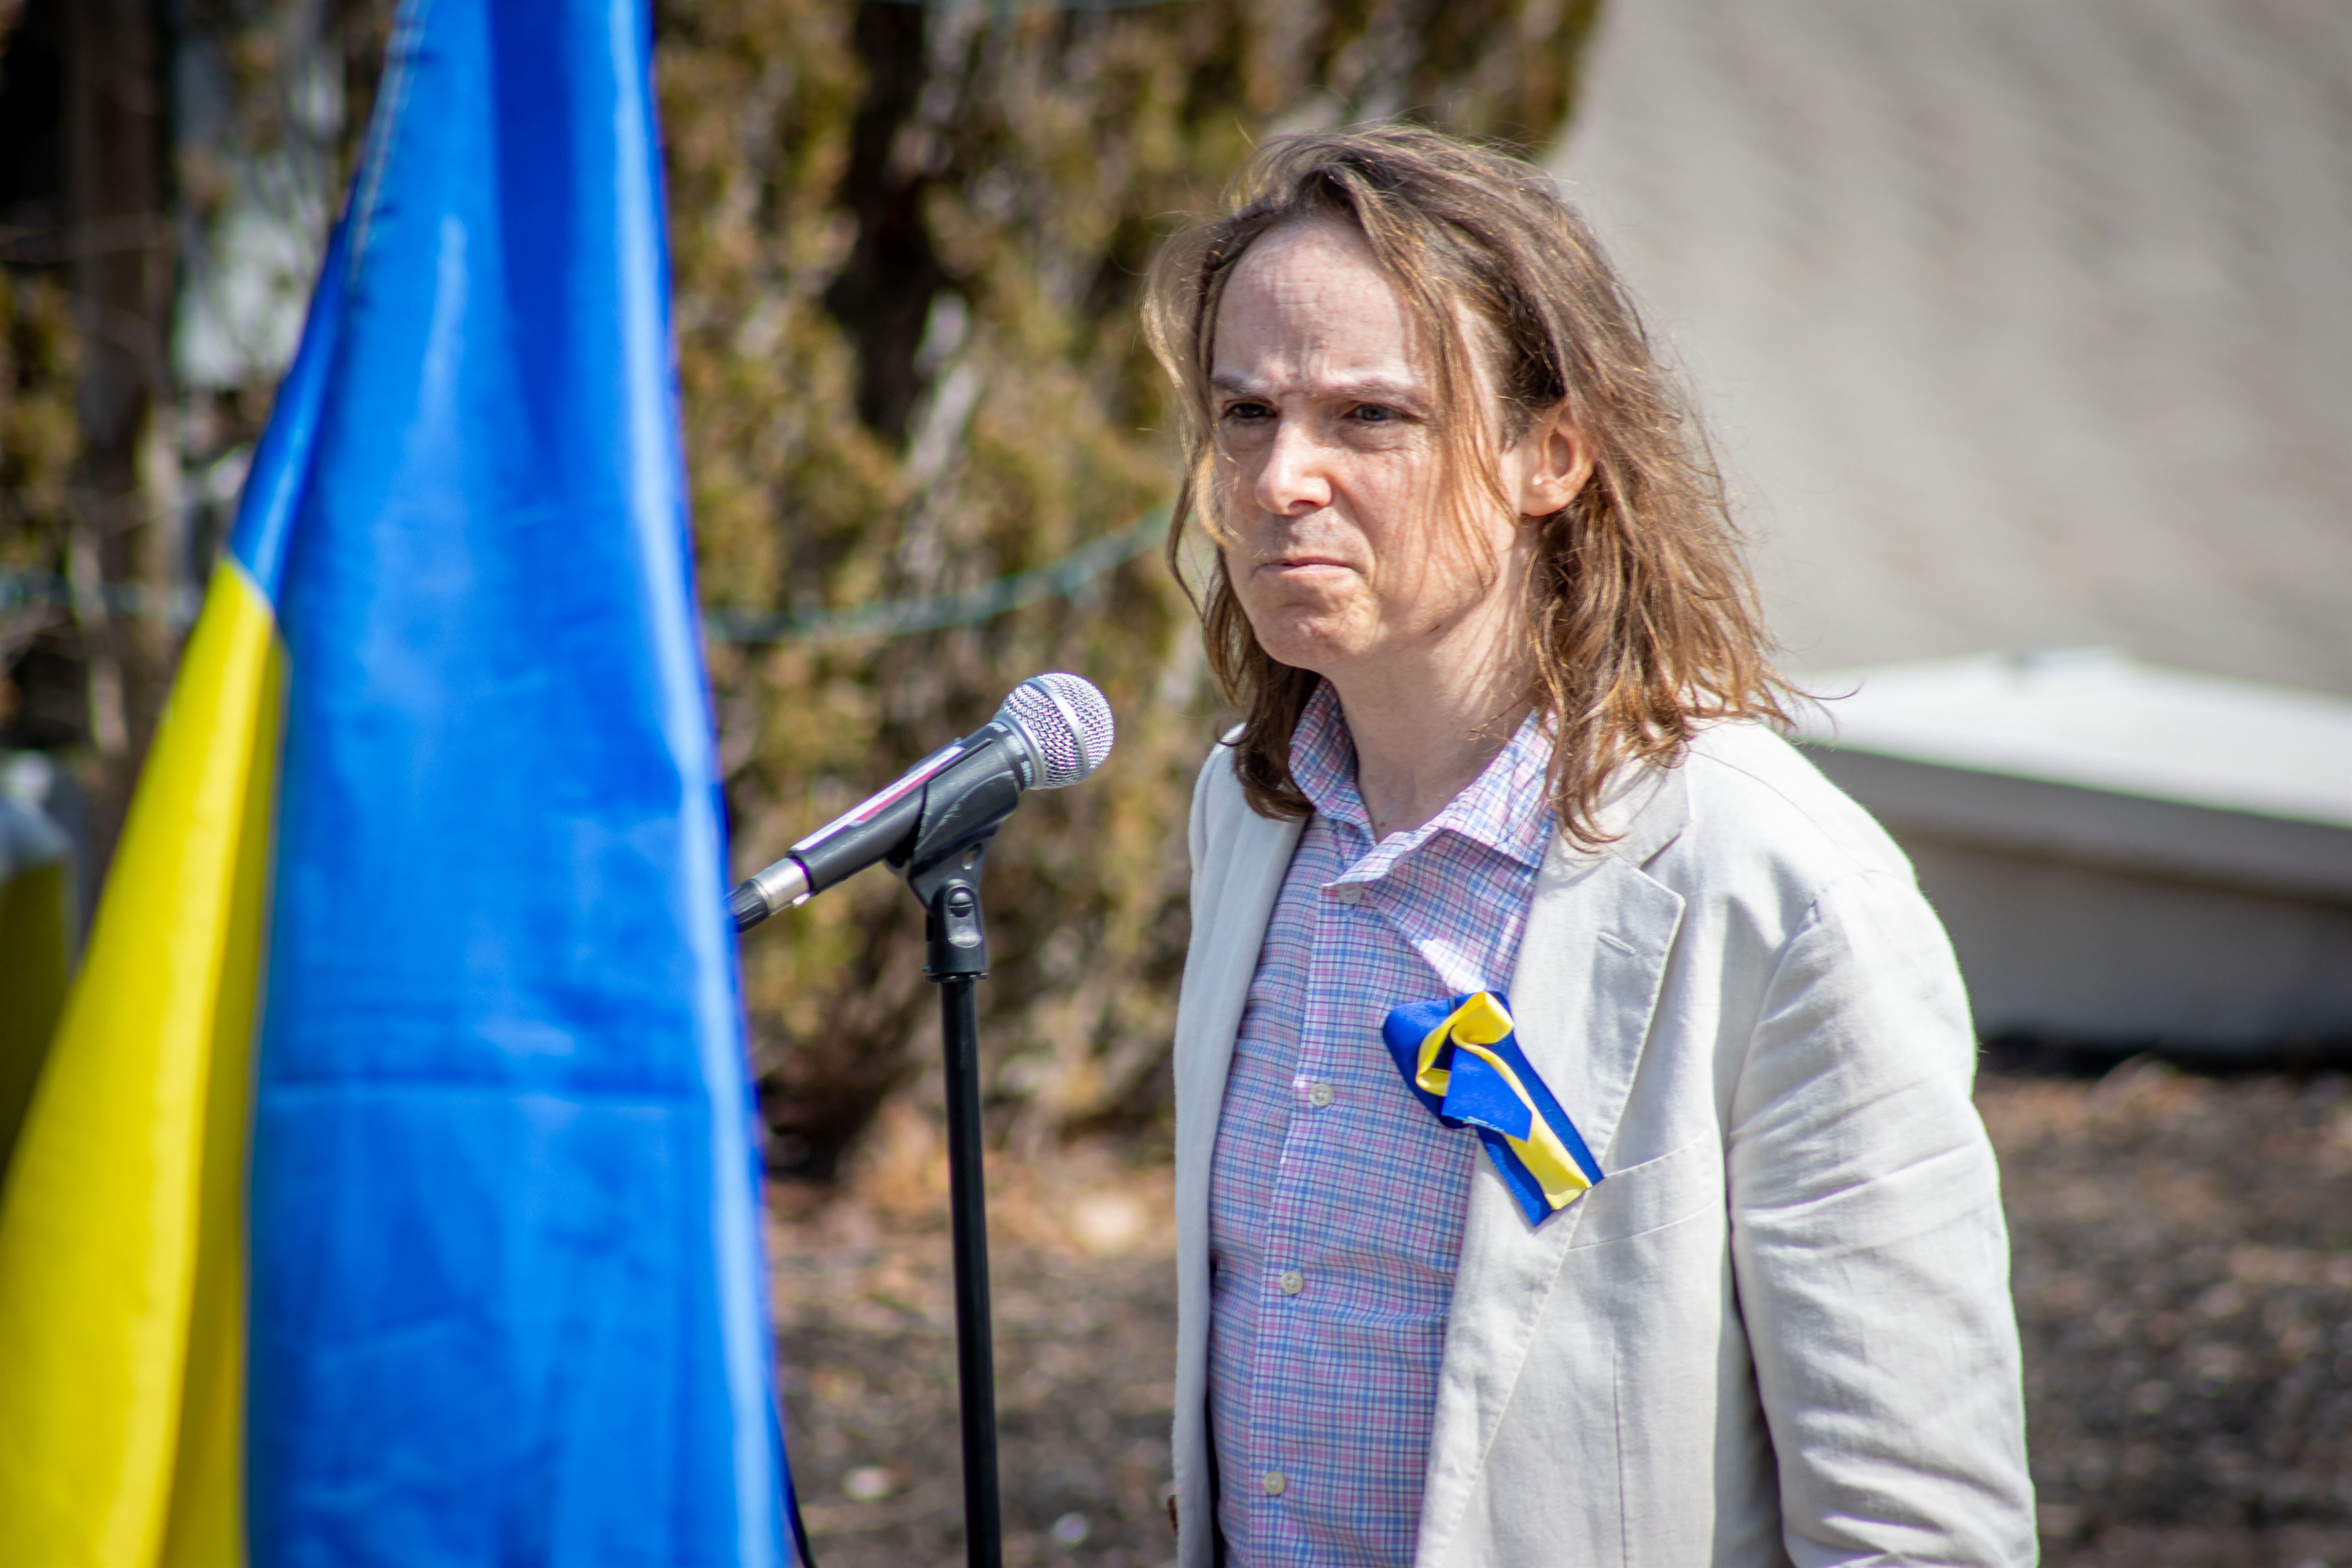 Jefferson Gatrall, coordinator of the Russian program at Montclair State and organizer of the event, says the Russian language does not belong to Putin or The Russian Federation. John LaRosa | The Montclarion